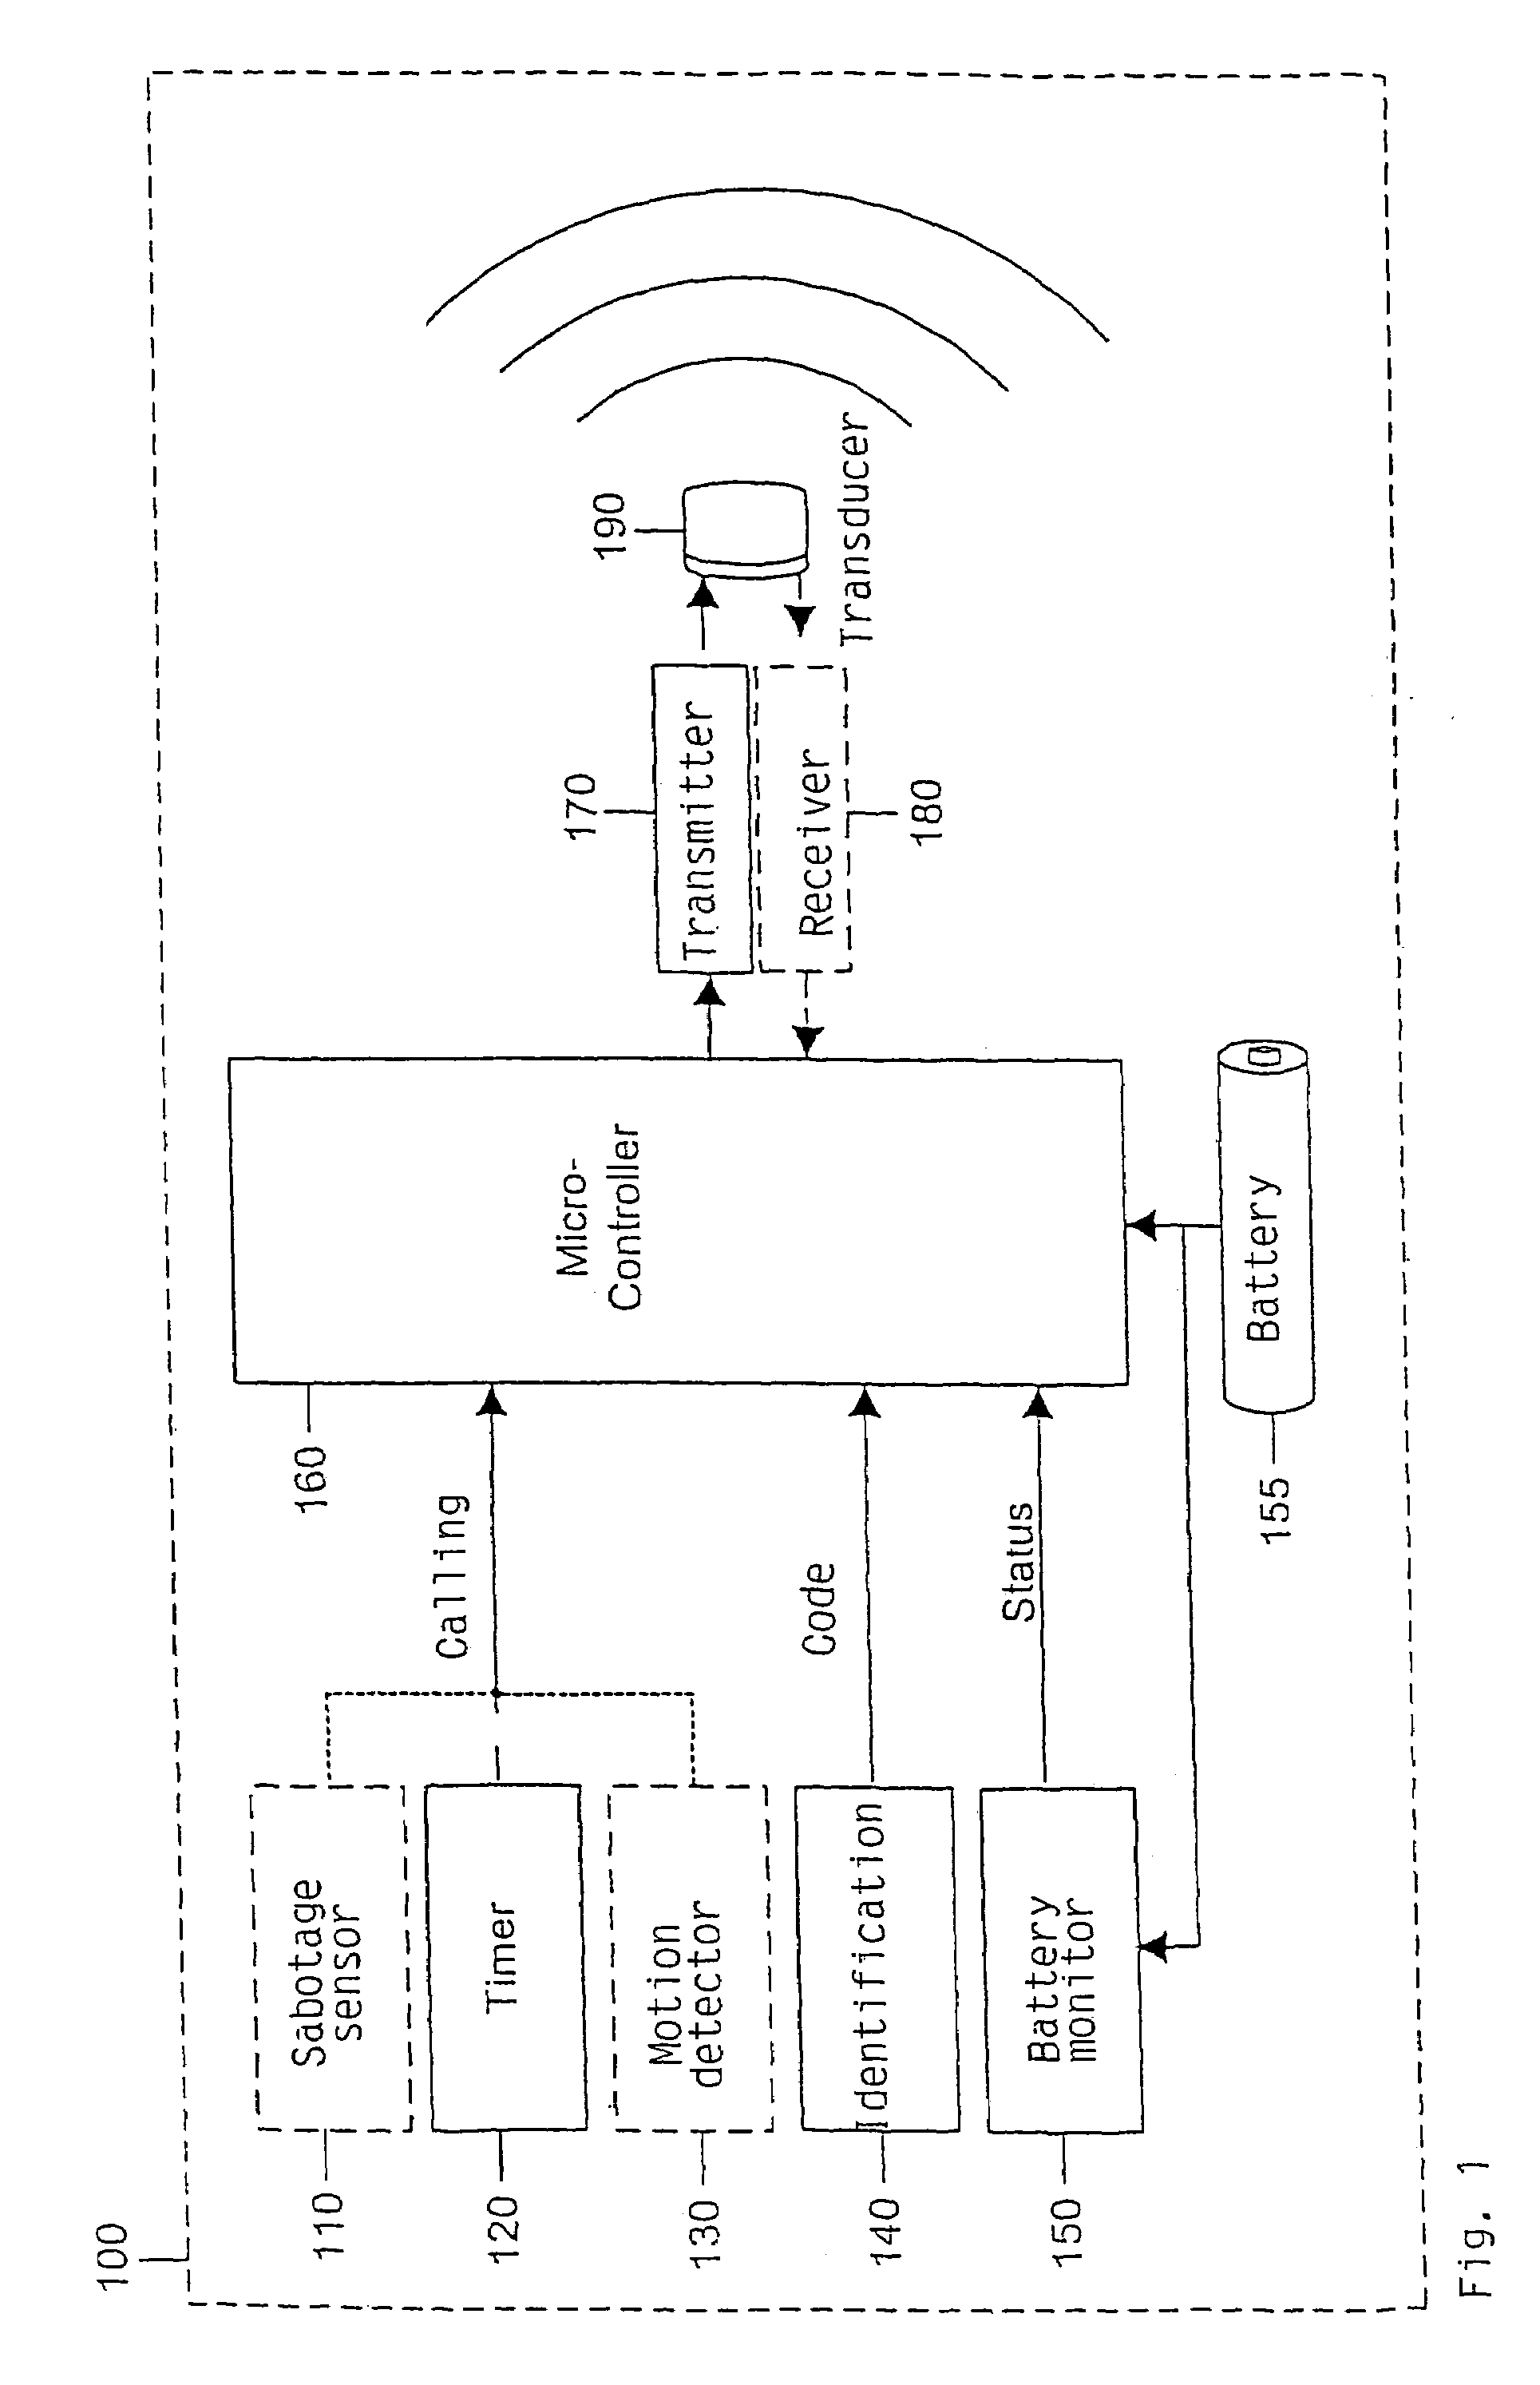 System and method for position determination of objects